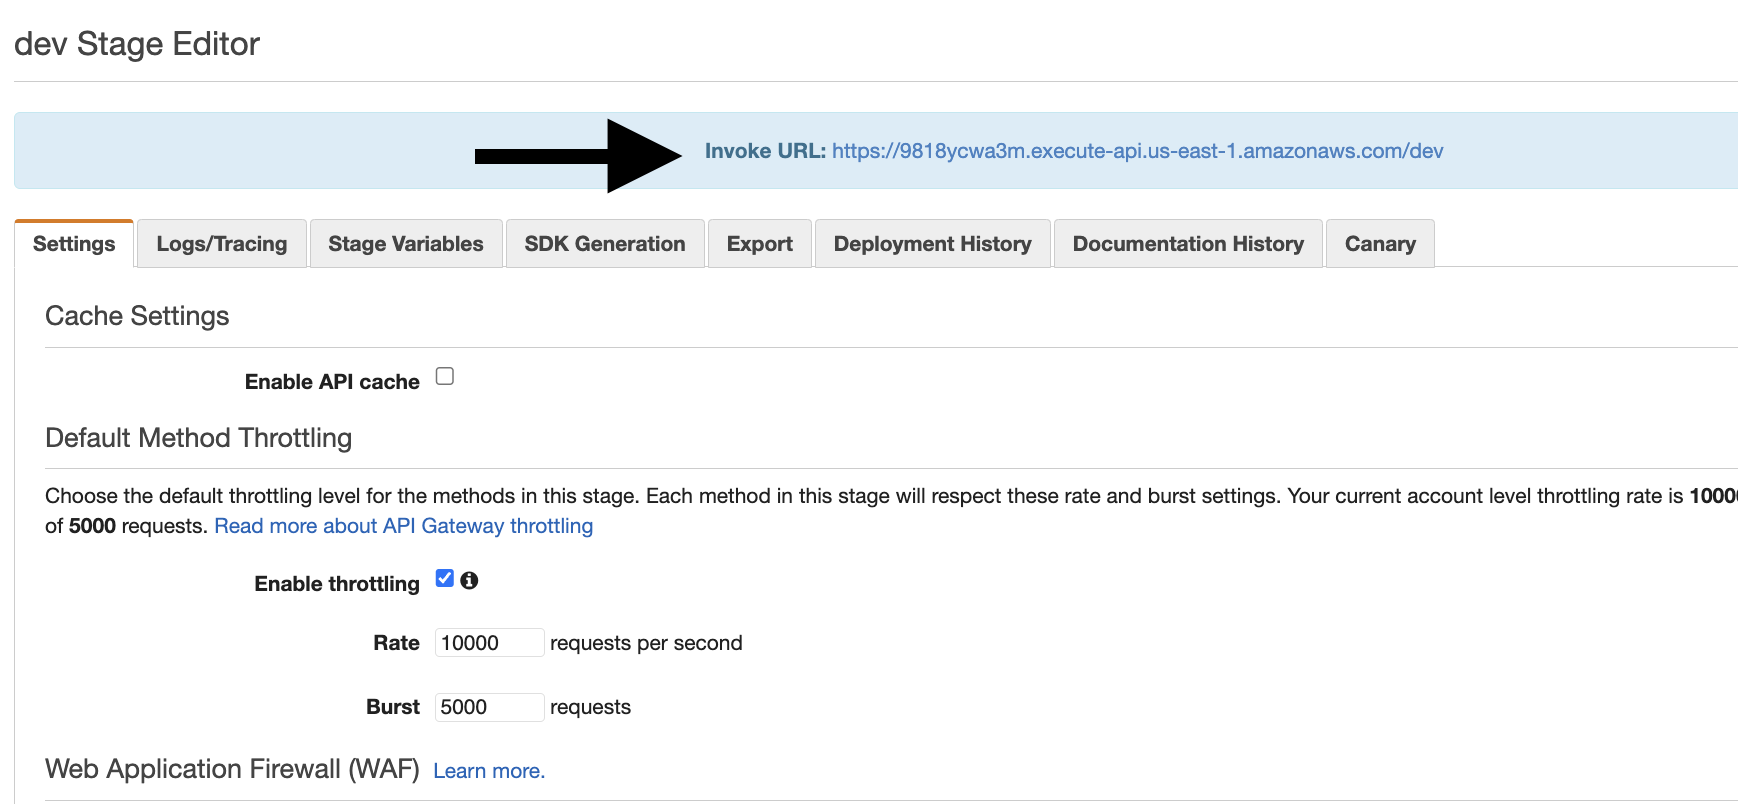 AWS API Gateway Testing: In the dev stage, view the Invoke URL and test the API by appending /healthcheck.